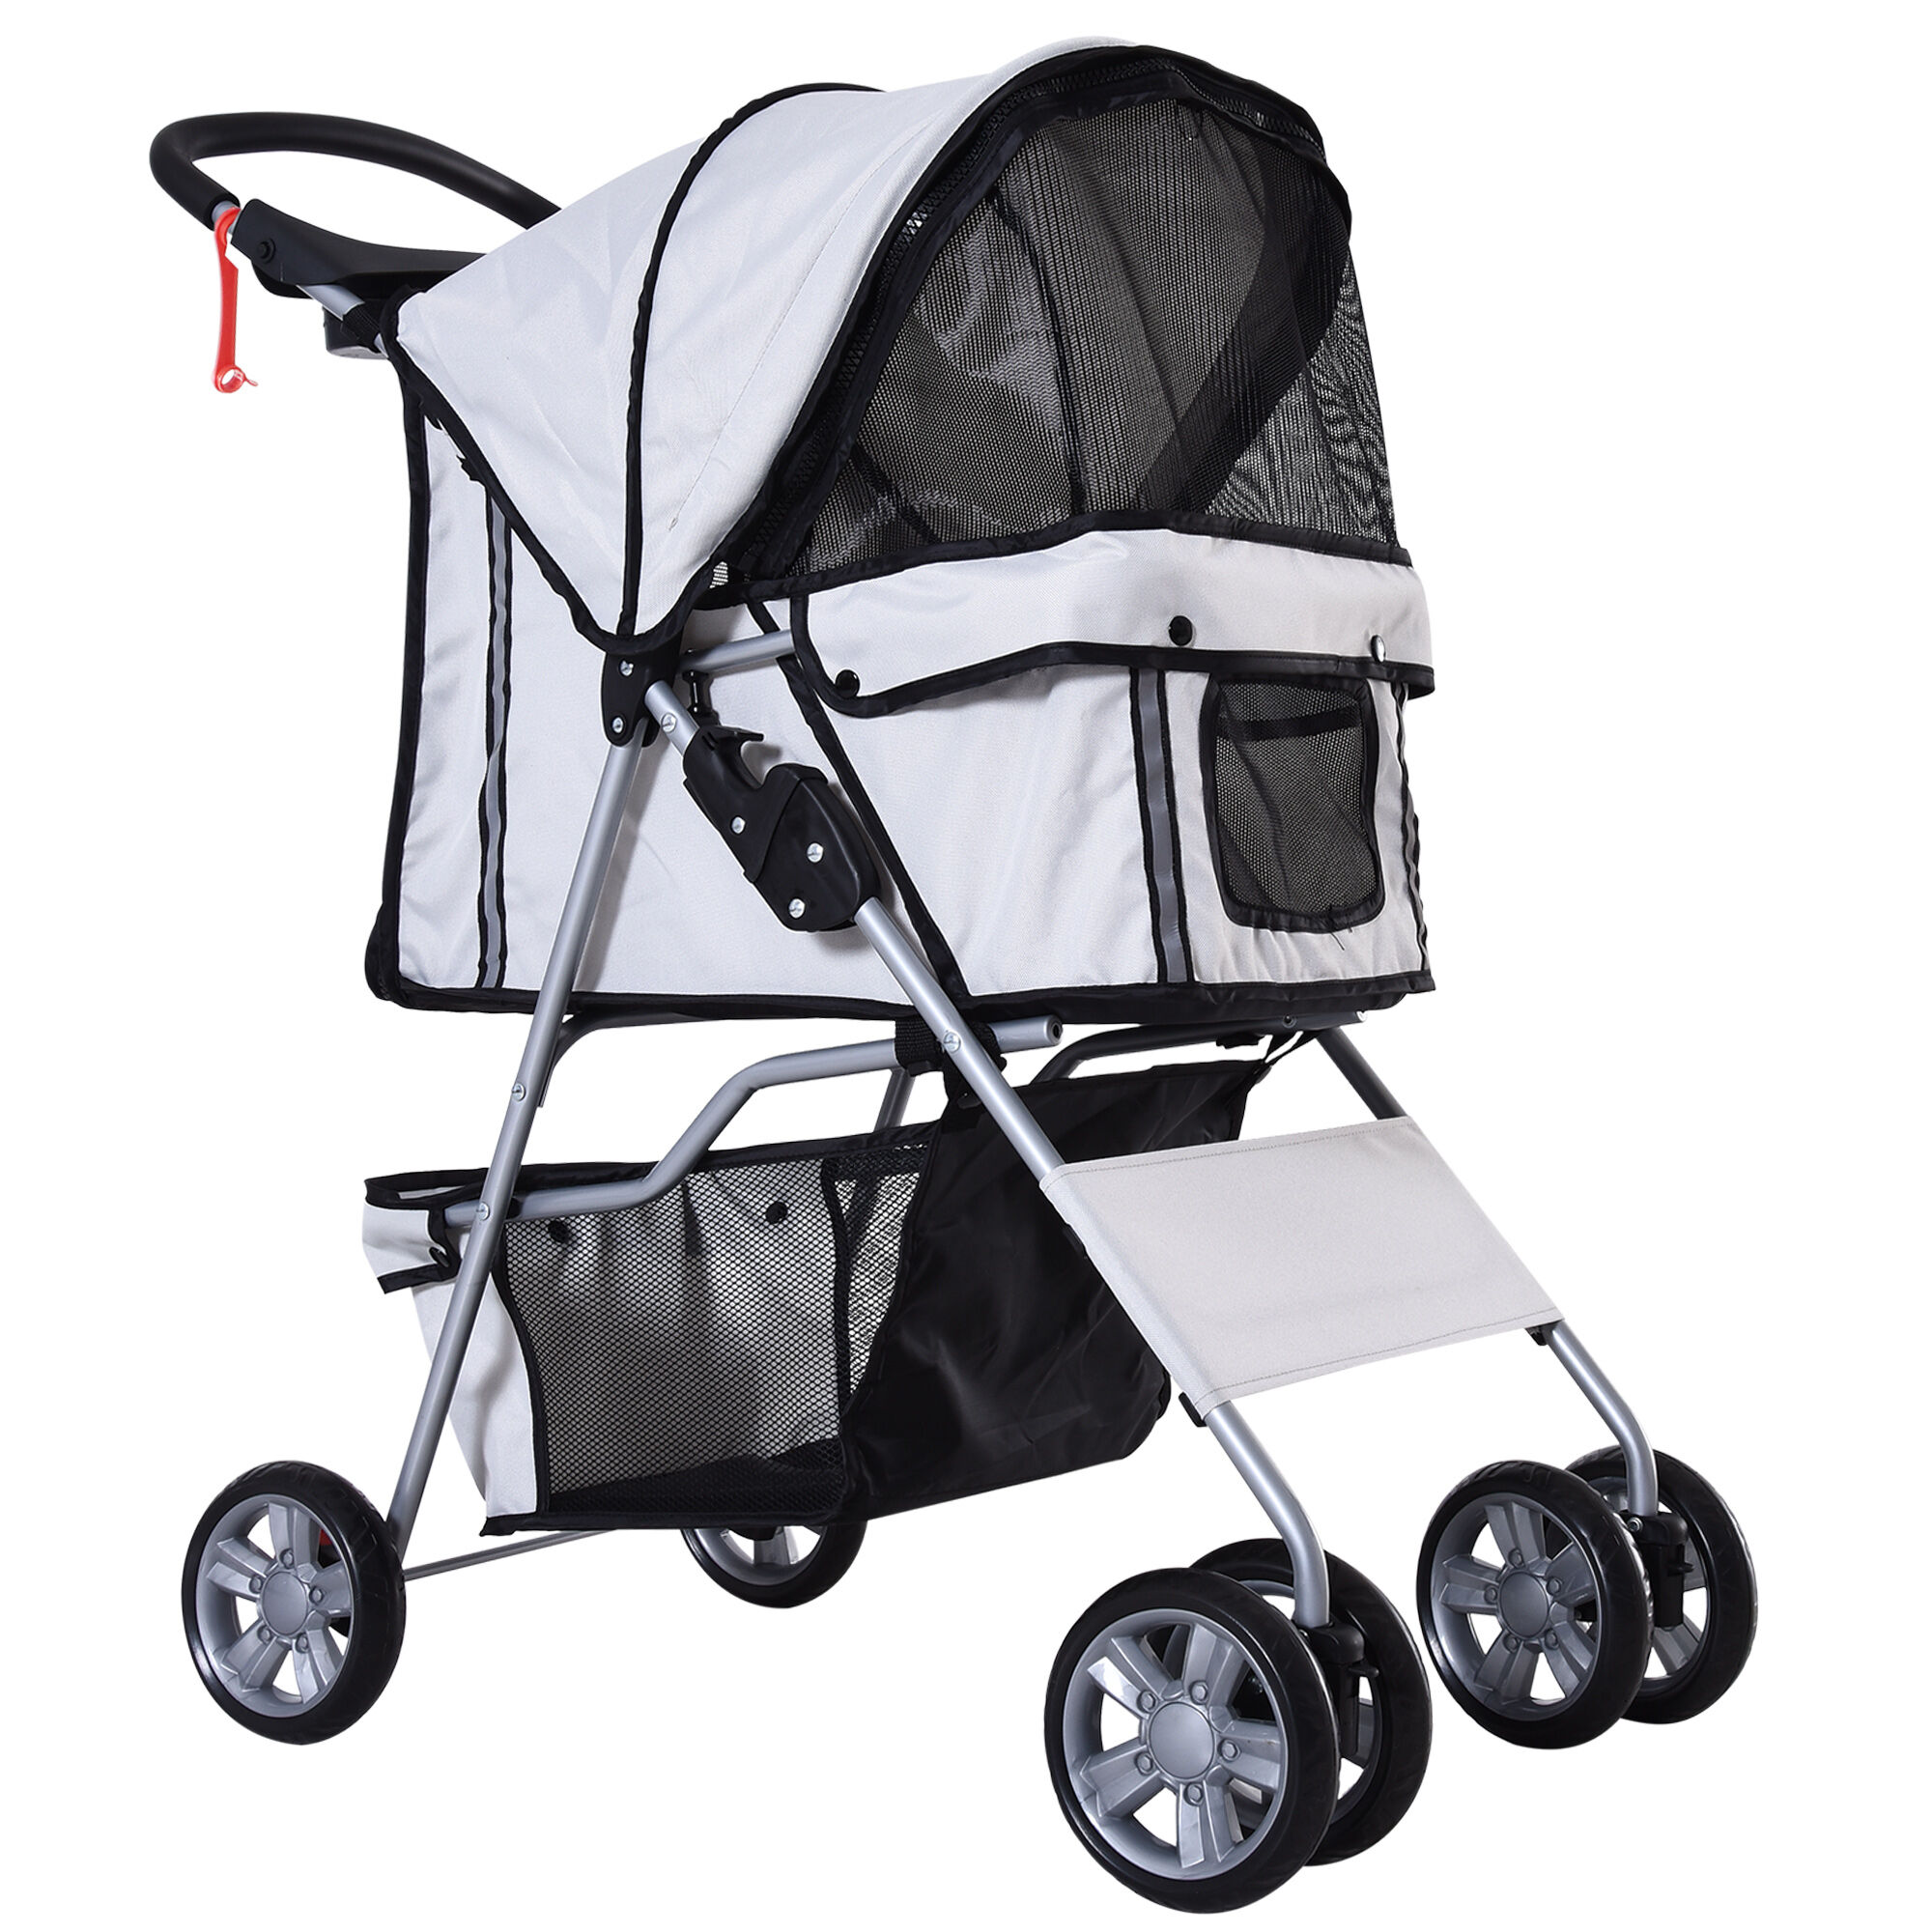 PawHut Pet Stroller for Dogs, Foldable Dog Pushchair with Wheels, Zipper Entry, Cup Holder, Storage Basket, Grey